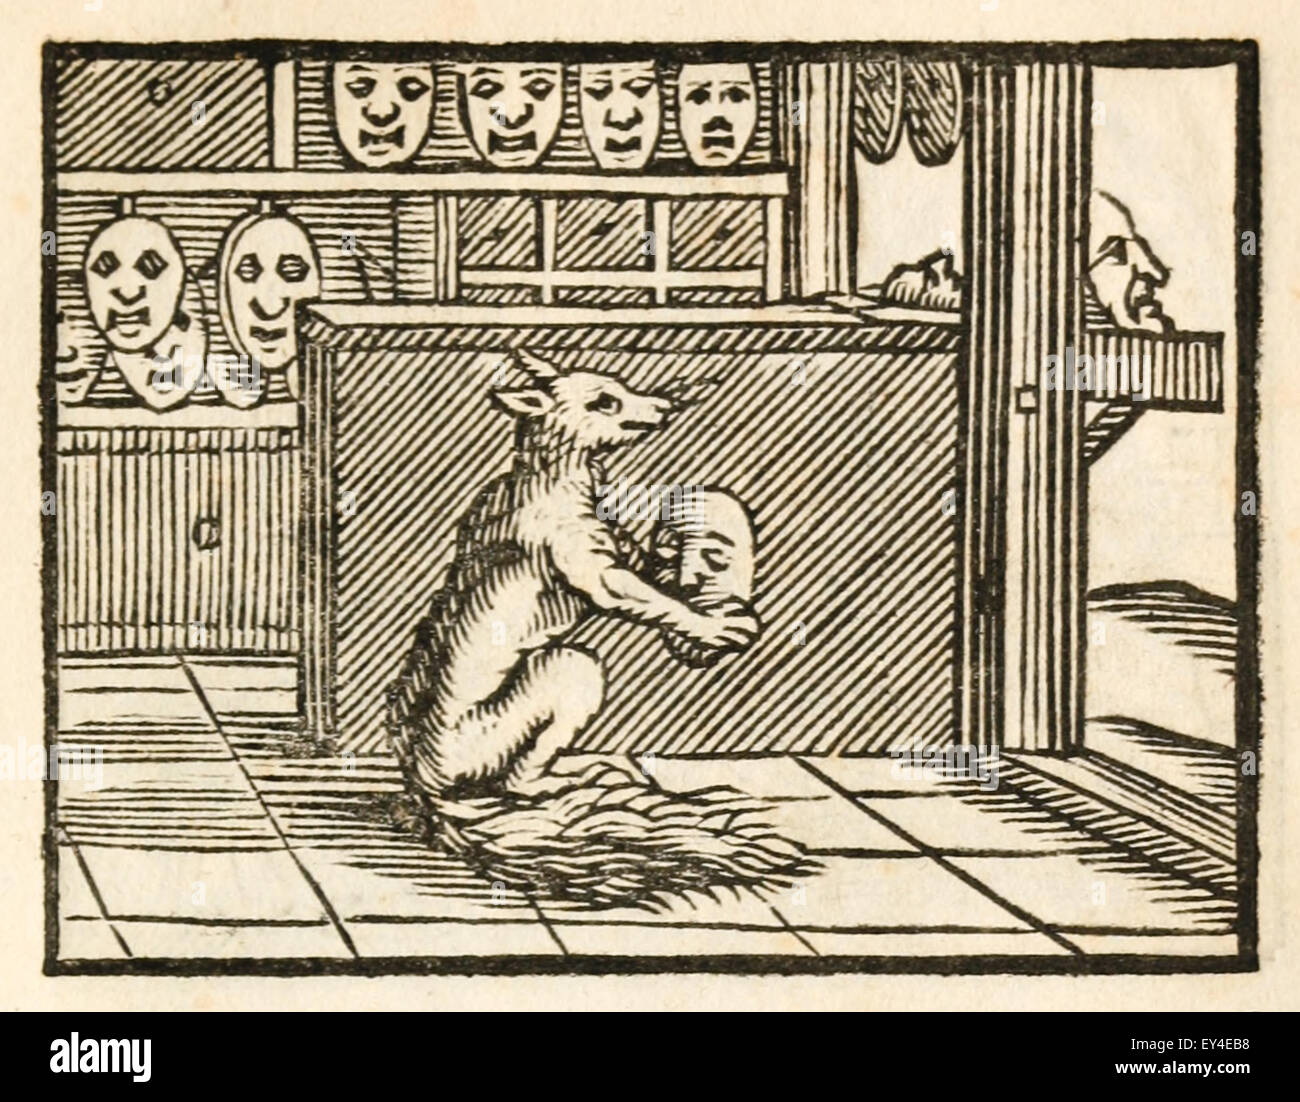 'The Fox and the Mask' fable by Aesop (circa 600BC). A fox comes across a mask anciently used by actors; after an examination, it remarks, 'So full of beauty, so empty of brains!' 17th century woodcut print illustrating Aesop's Fables. See description for more information. Stock Photo